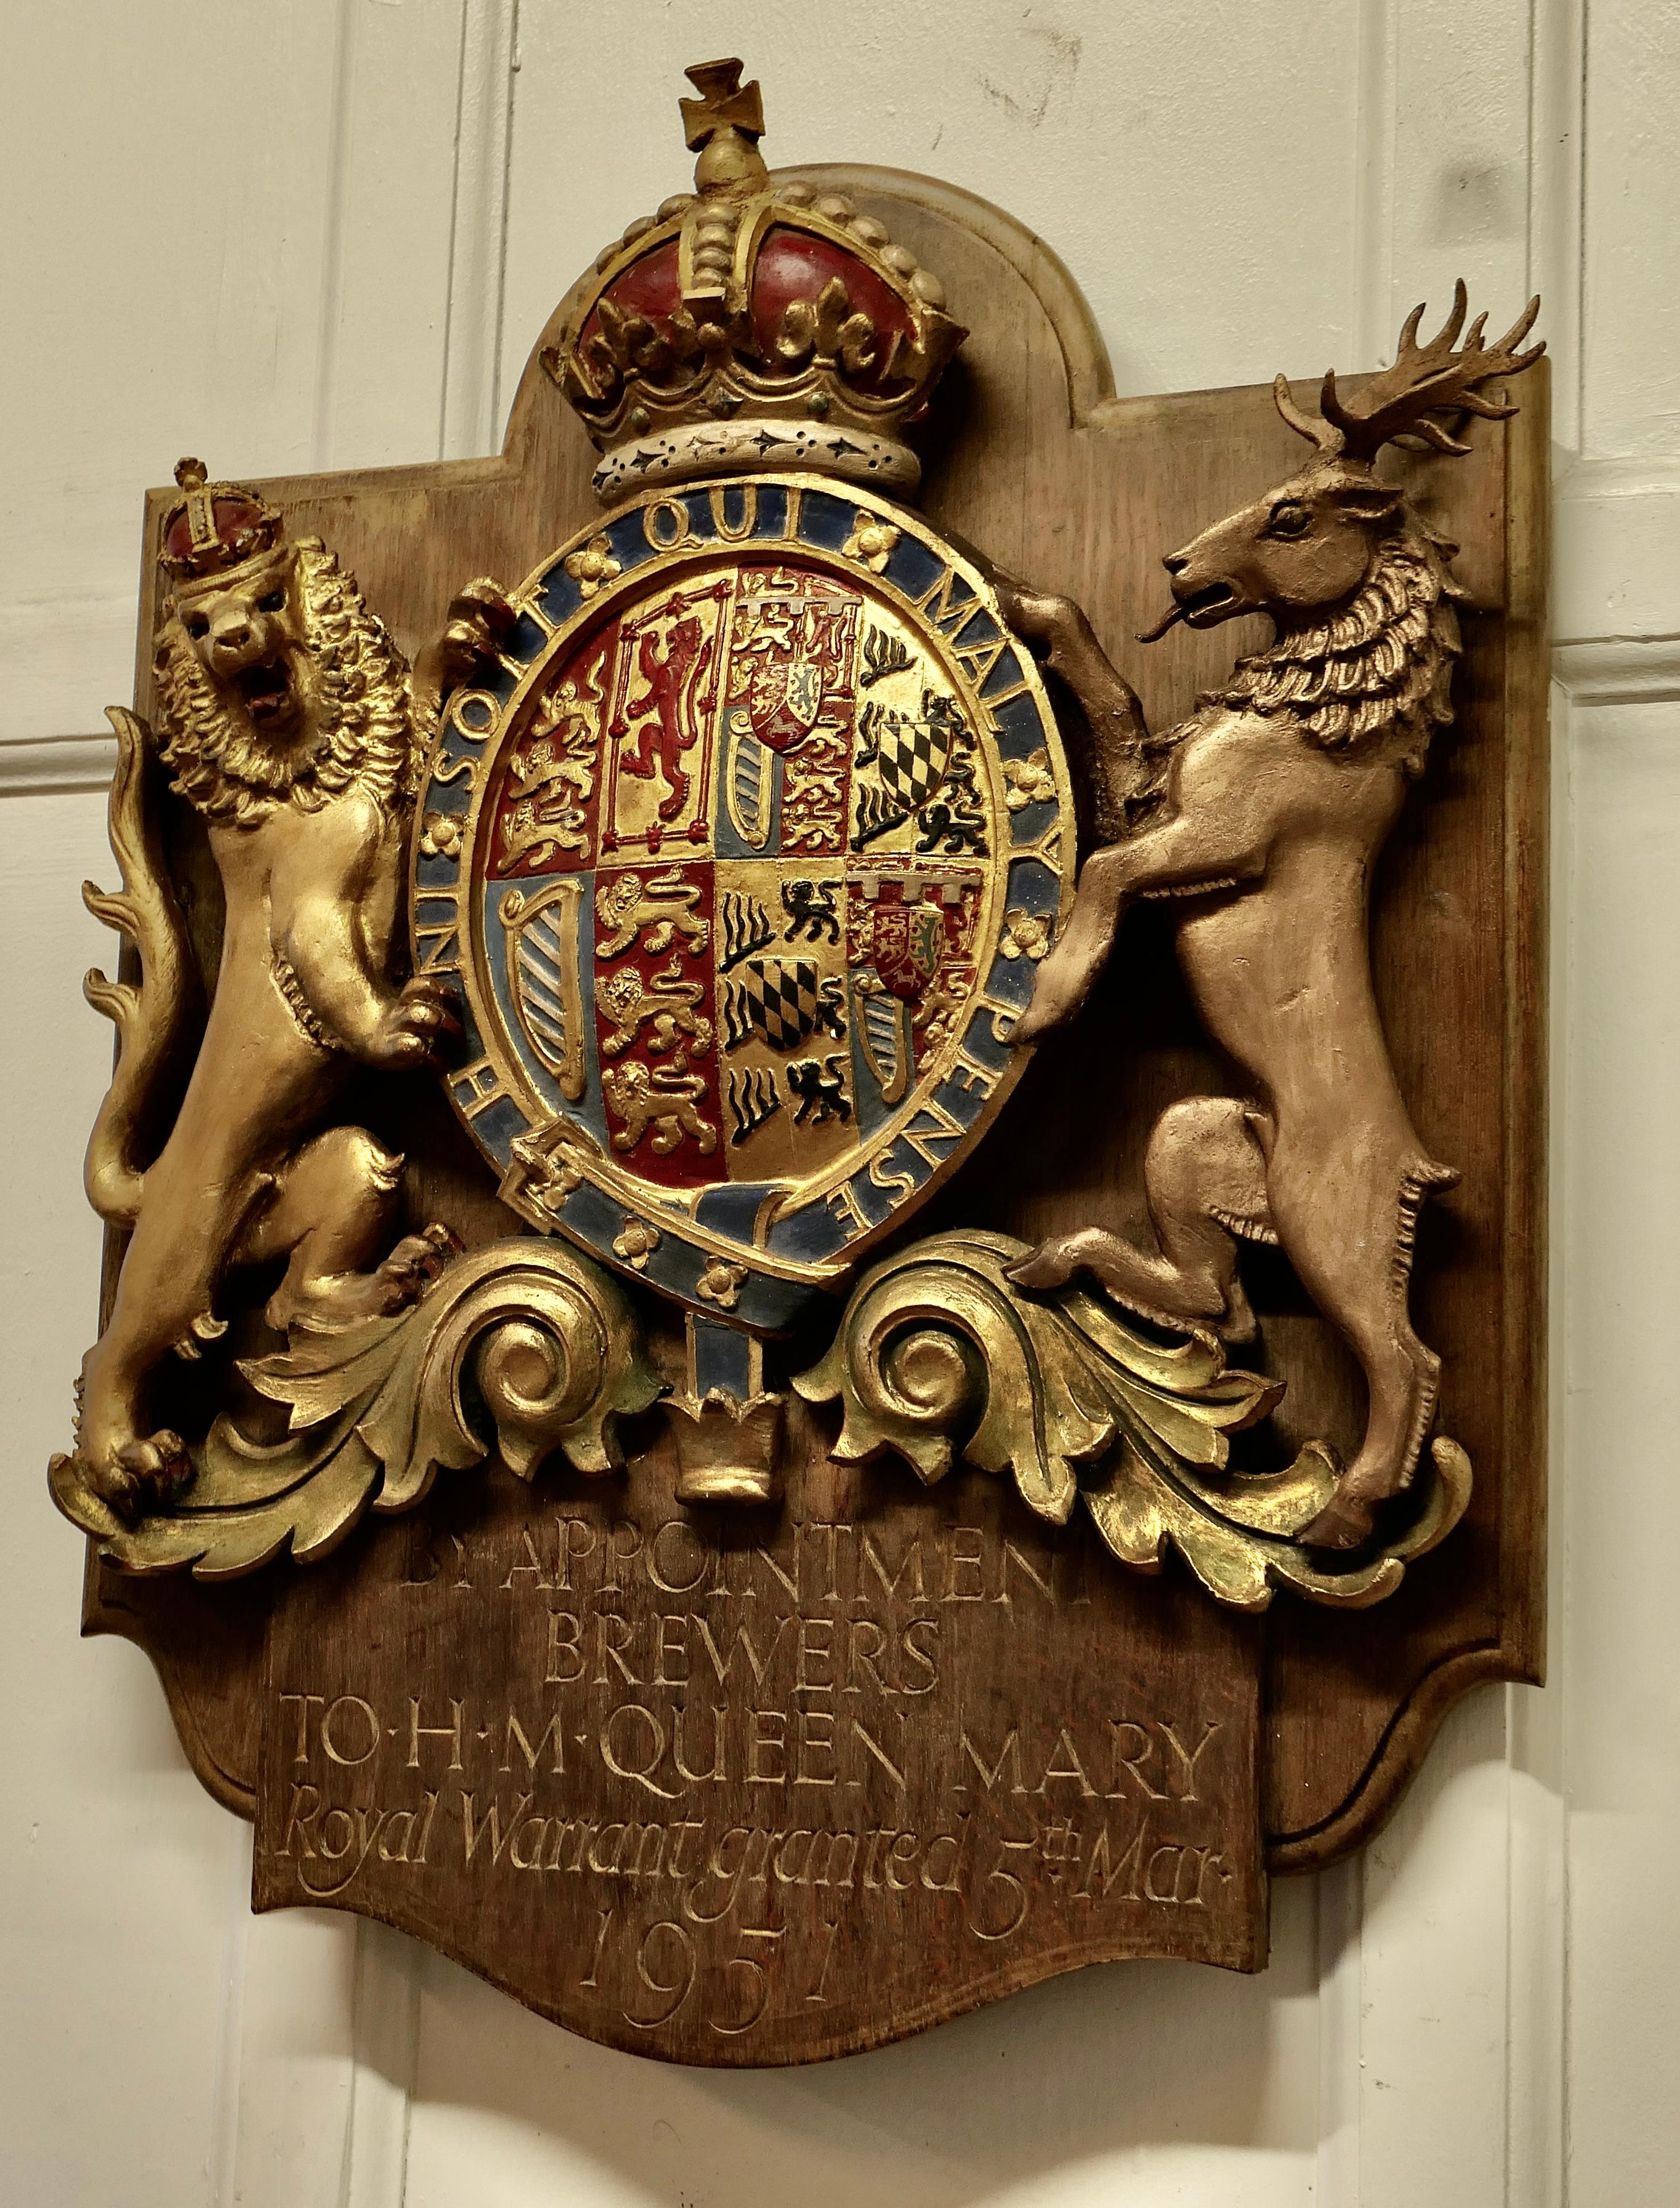 Large hand carved british royal coat of arms brewers wall plaque.


This is a very fine piece, it dates from the 1950s and is hand carved from solid oak and painted over gesso in gold and rich colours, it celebrates the Royal warrant granted to